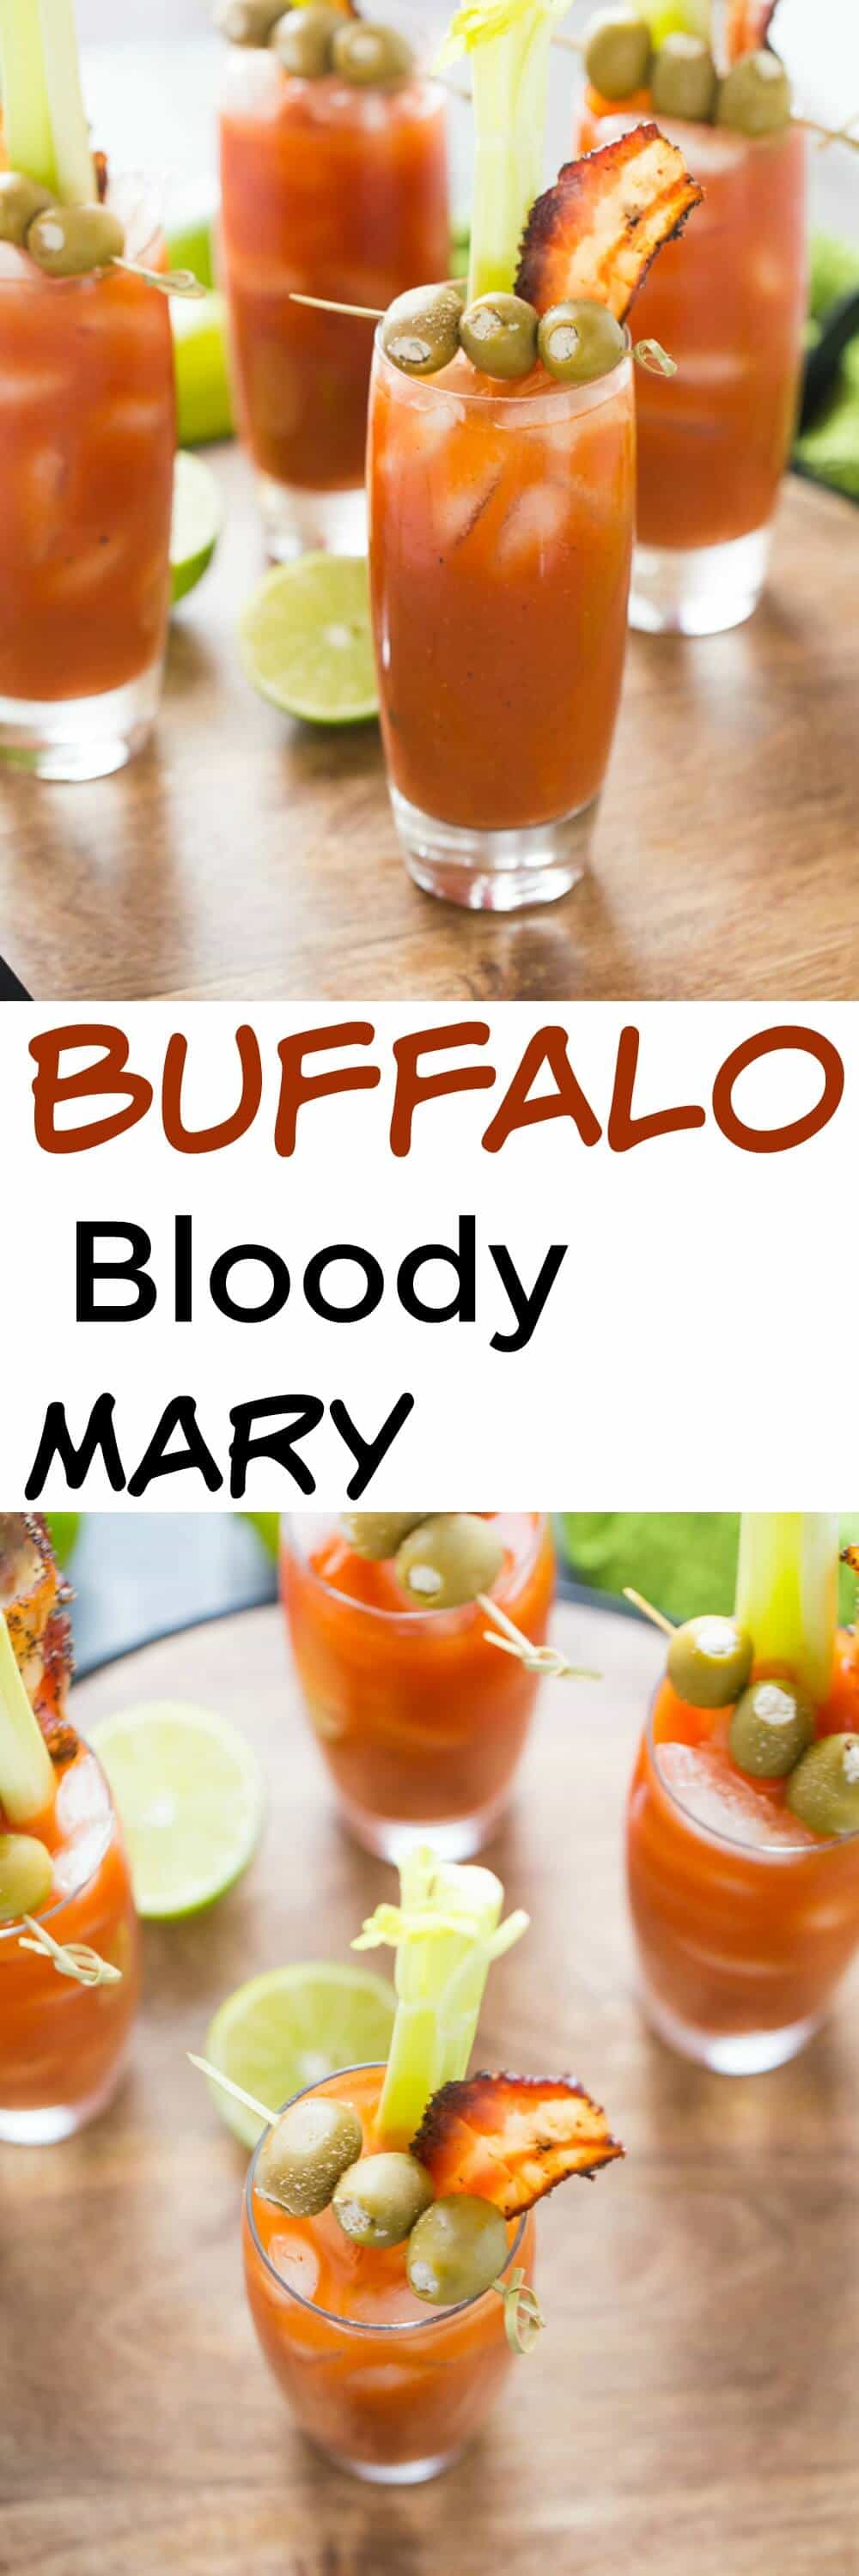 This bloody Mary is one of a kind! Spicy Buffalo sauce is mixed into each cocktail. Finish these drinks off with blue cheese stuffed olives and peppery bacon! lemonsforlulu.com